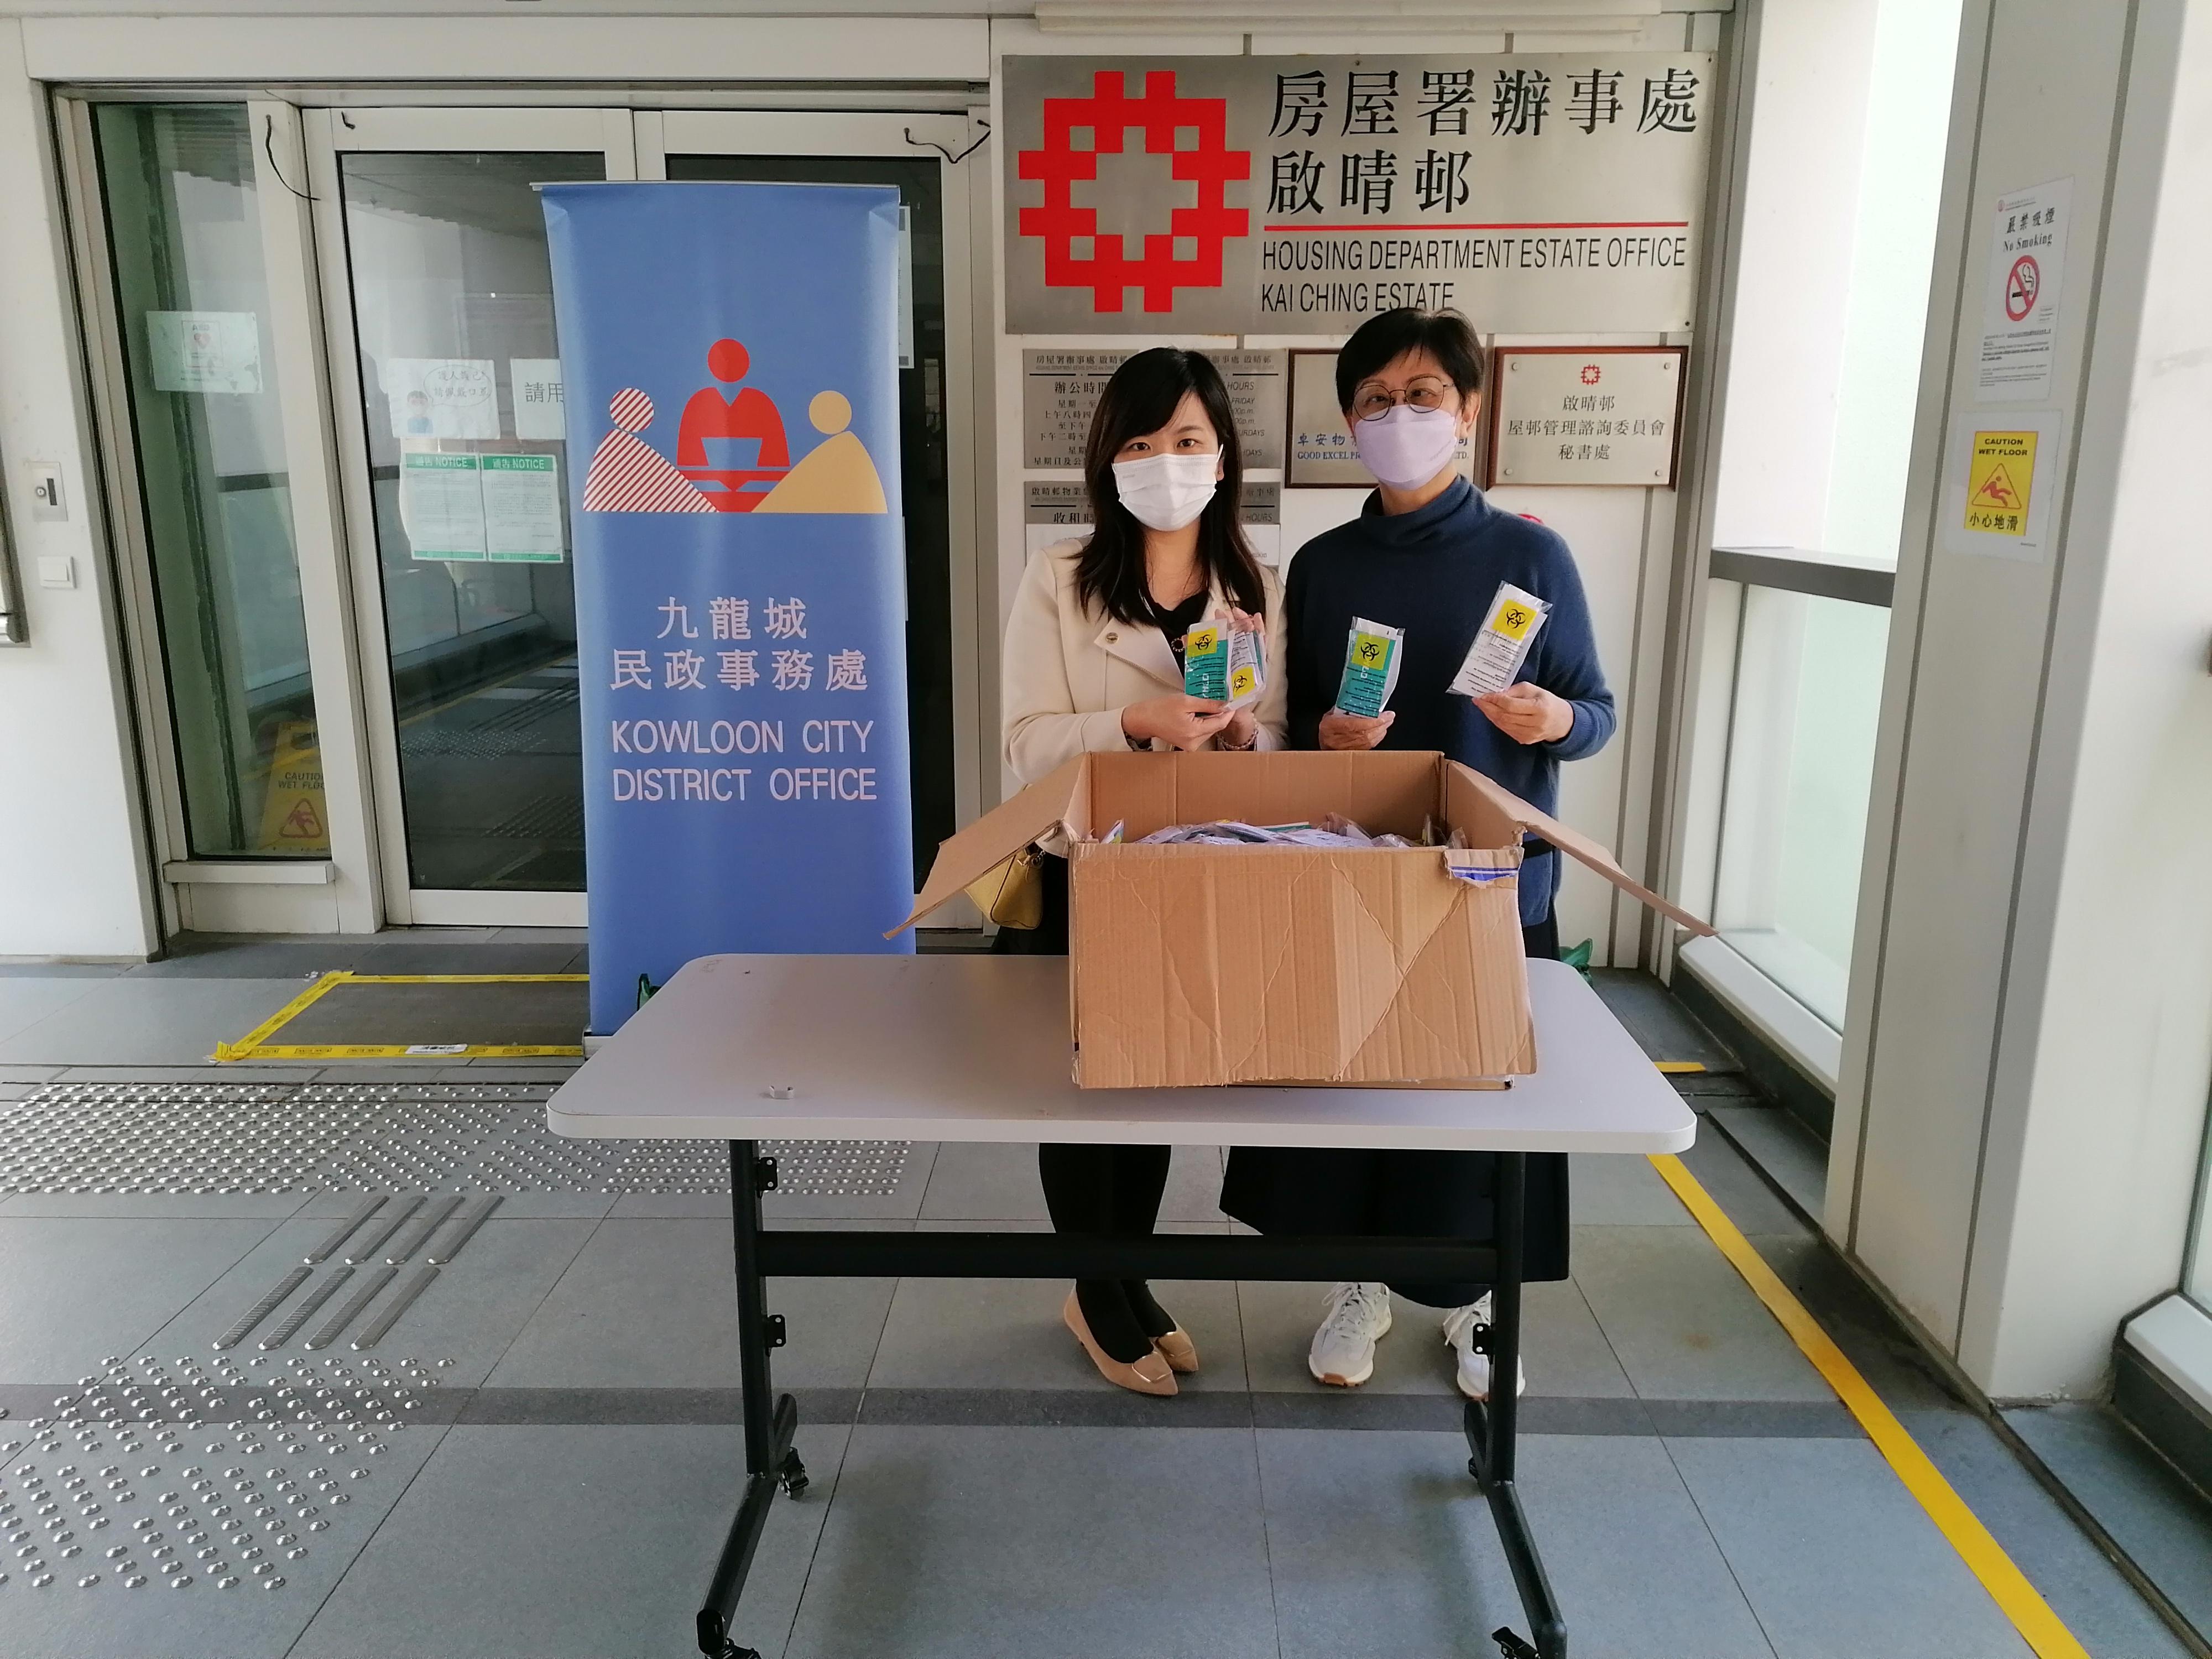 The Kowloon City District Office today (February 25) distributed rapid test kits to cleansing workers and property management staff working in Kai Ching Estate for voluntary testing through the property management company.